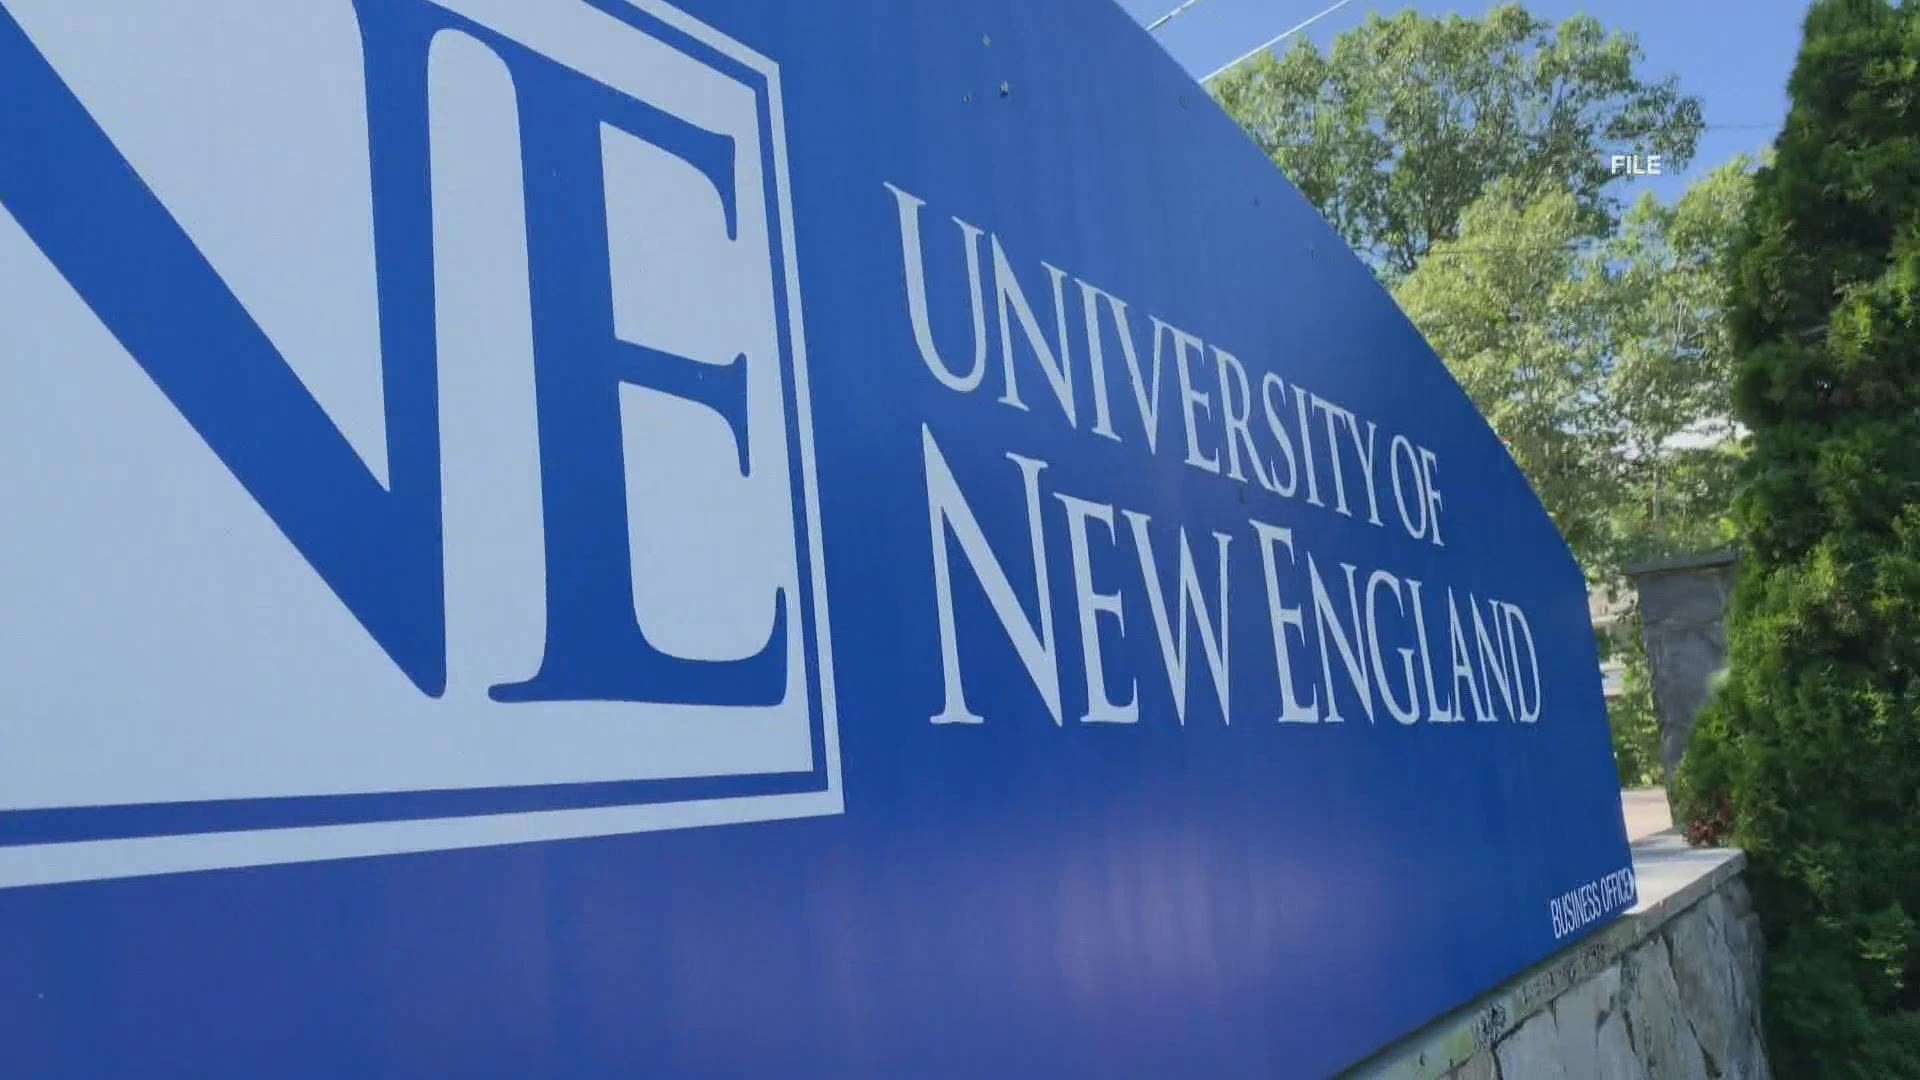 UNE will allow for religious and medical exemptions to the policy, but those who are not vaccinated will be required to wear a mask while on campus.